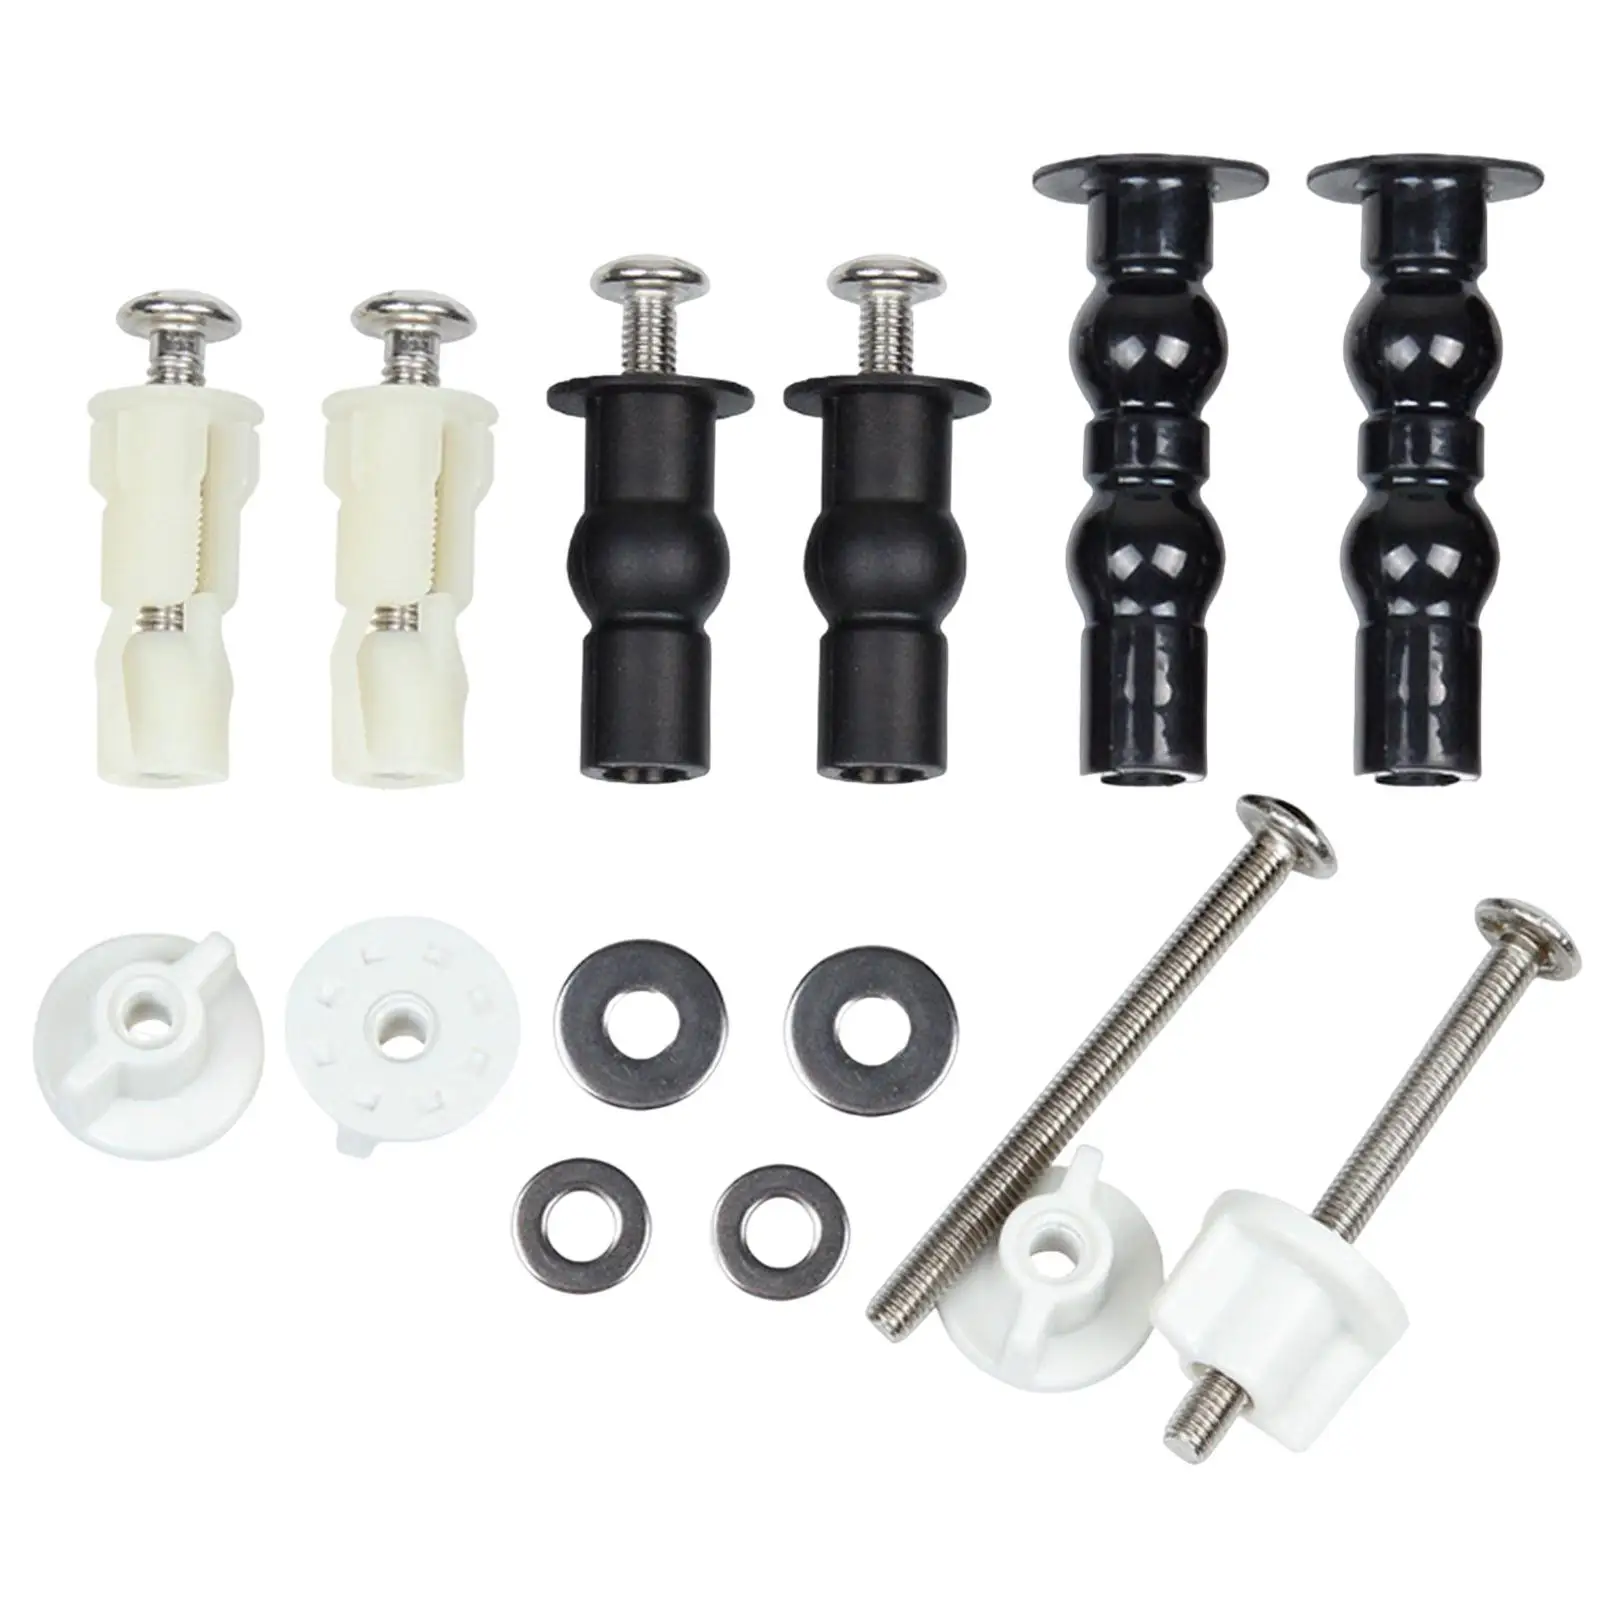 Universal Toilet Seats Screws Bolts Toilet Seat Parts Expanding Nuts Screws Mount Easy to Install Hardware Fixtures